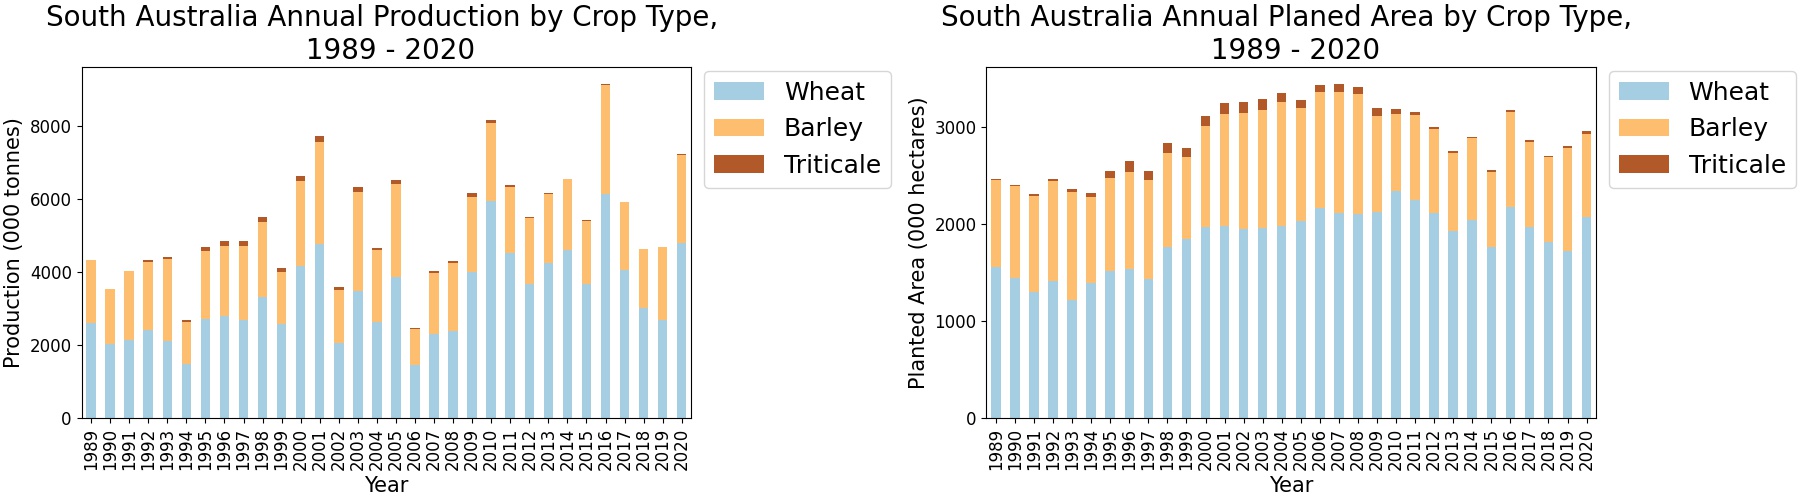 South Australian Cereal Cropping Production, Area Planted and Average Yield, 1989 -2020